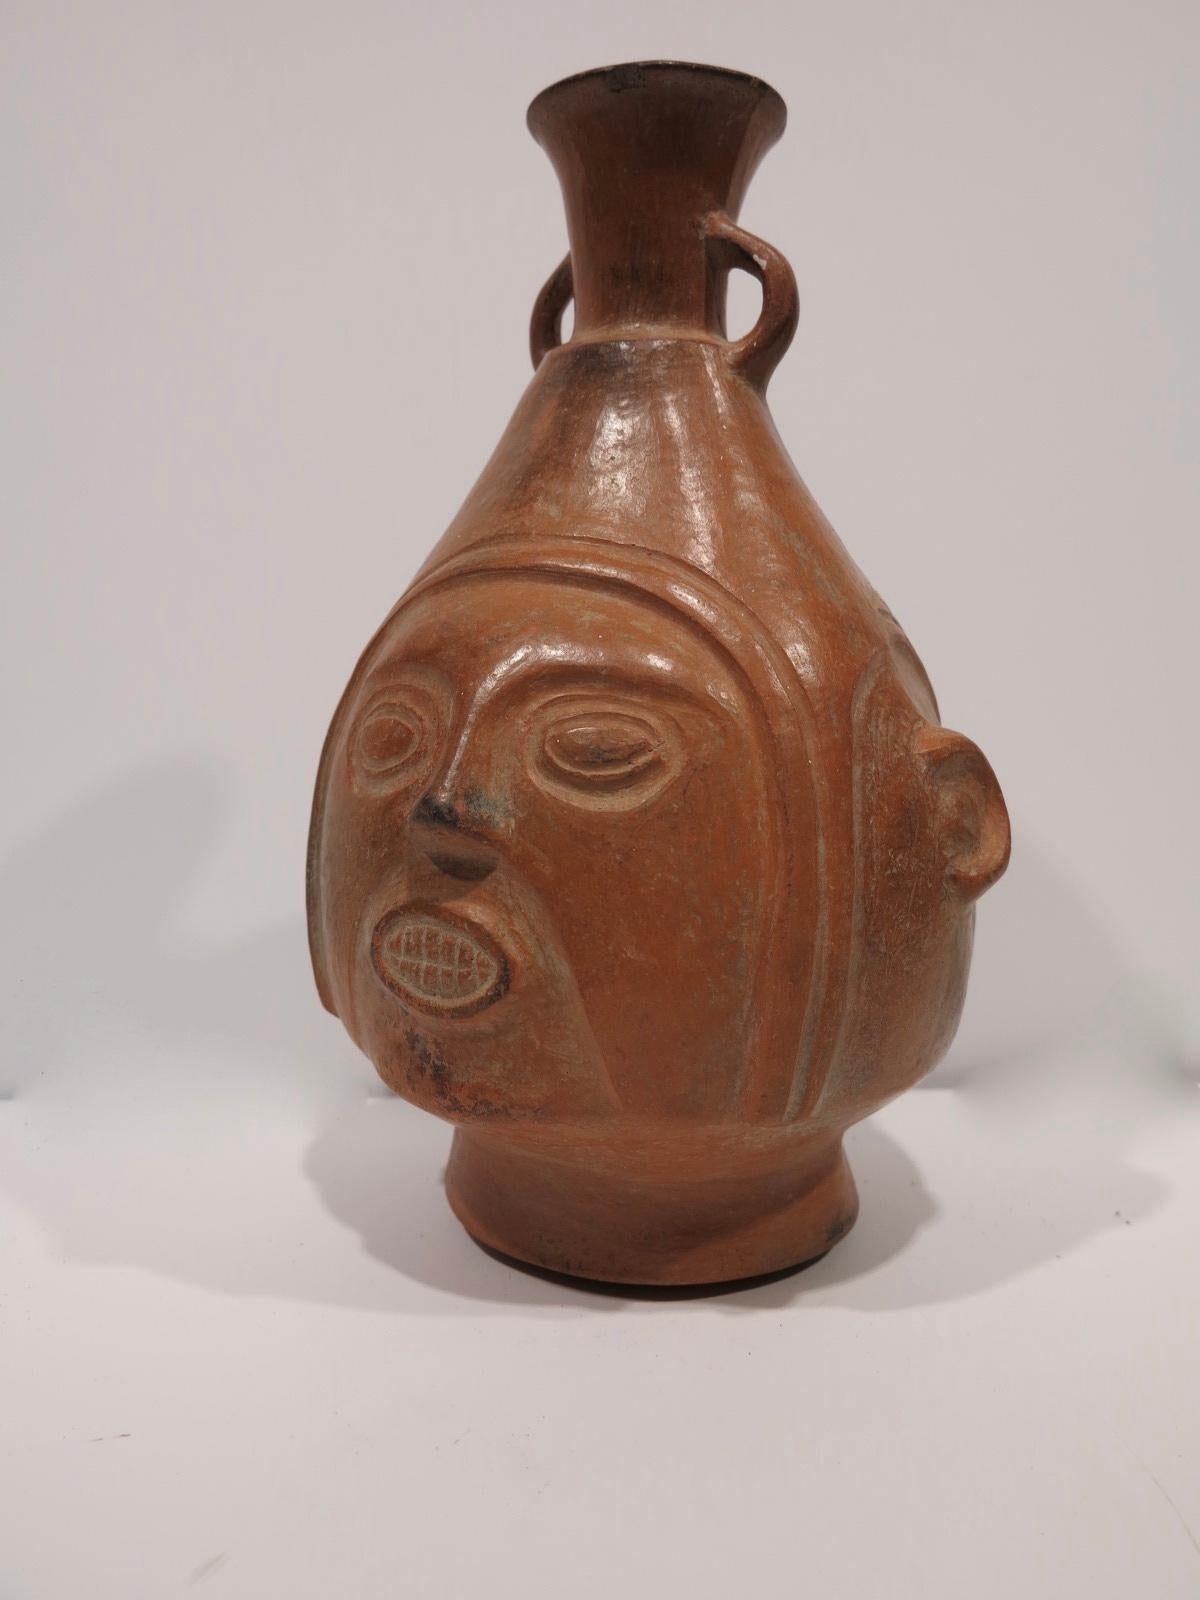 Beautiful pre-Columbian Chimu vessel. Terracotta, a.d. 1100-1400,  Peru. One very minor chip under rim of vessel opening. Otherwise outstanding condition. 